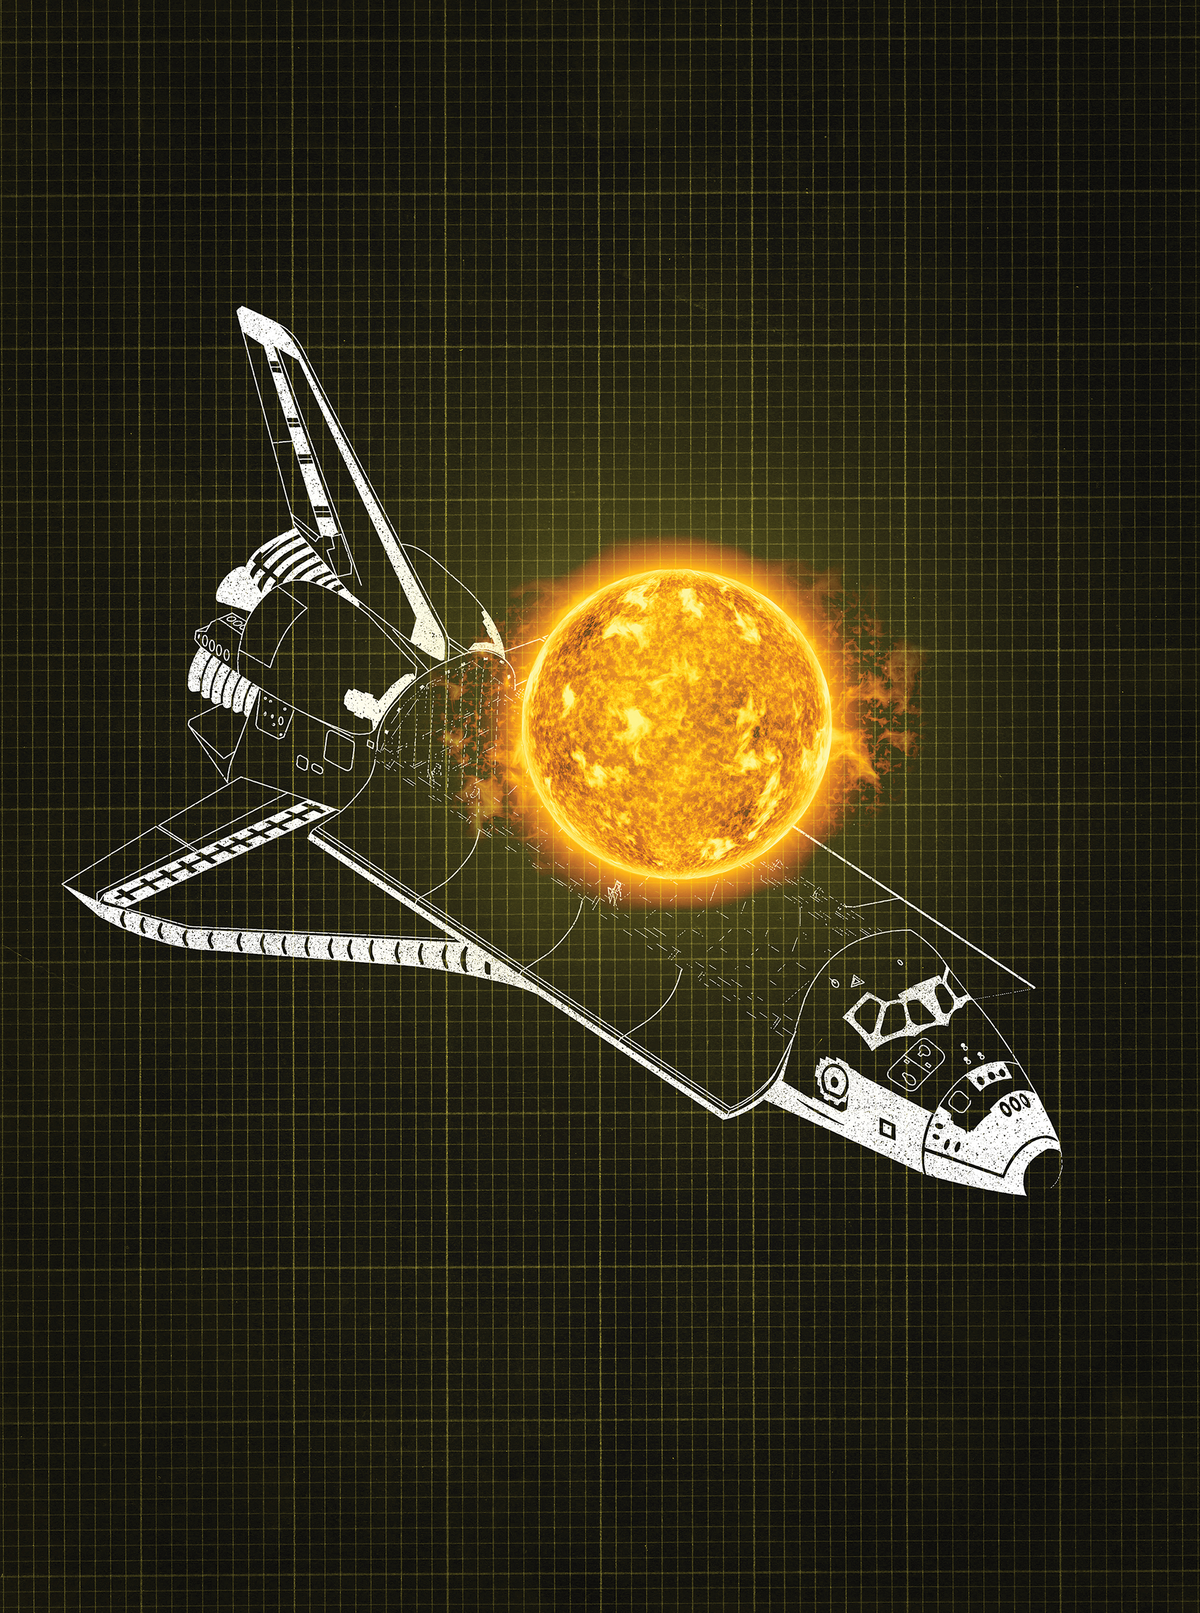 An illustration of the shuttle with payload doors open and a Sun hovering over it.  